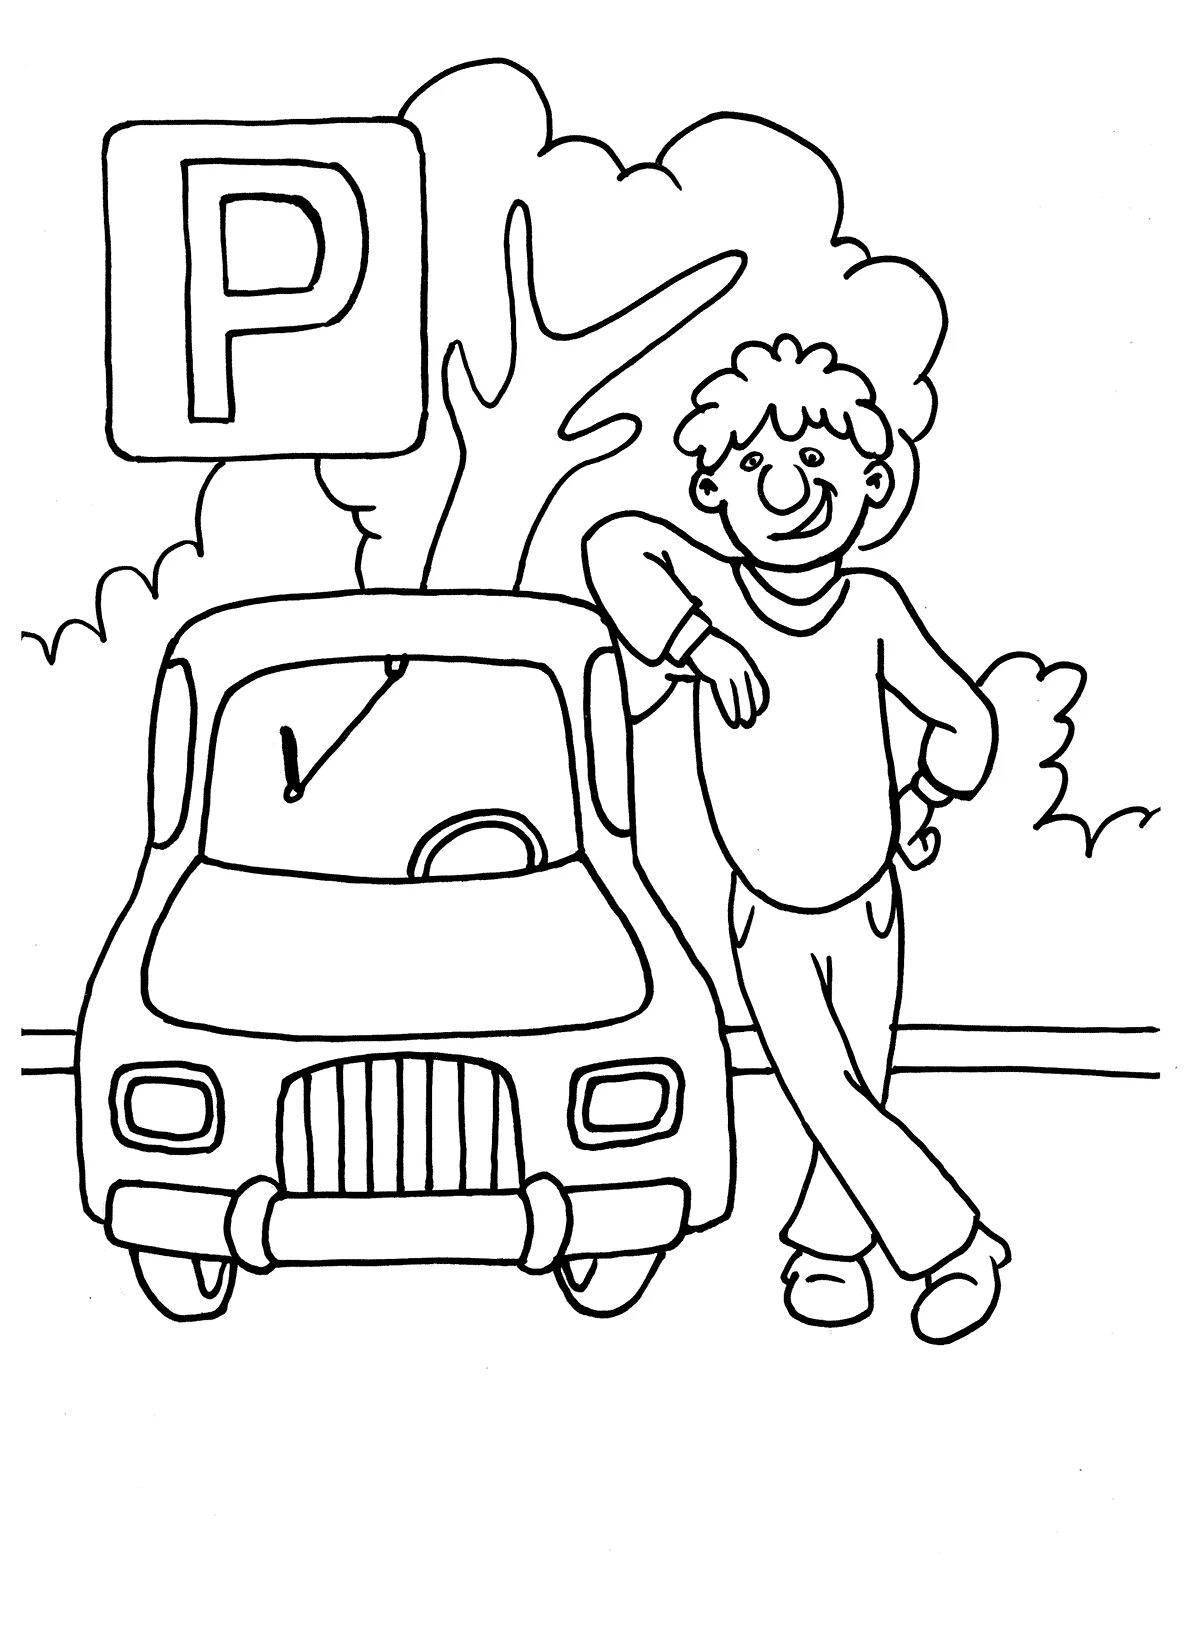 Coloring page amazing parking sign